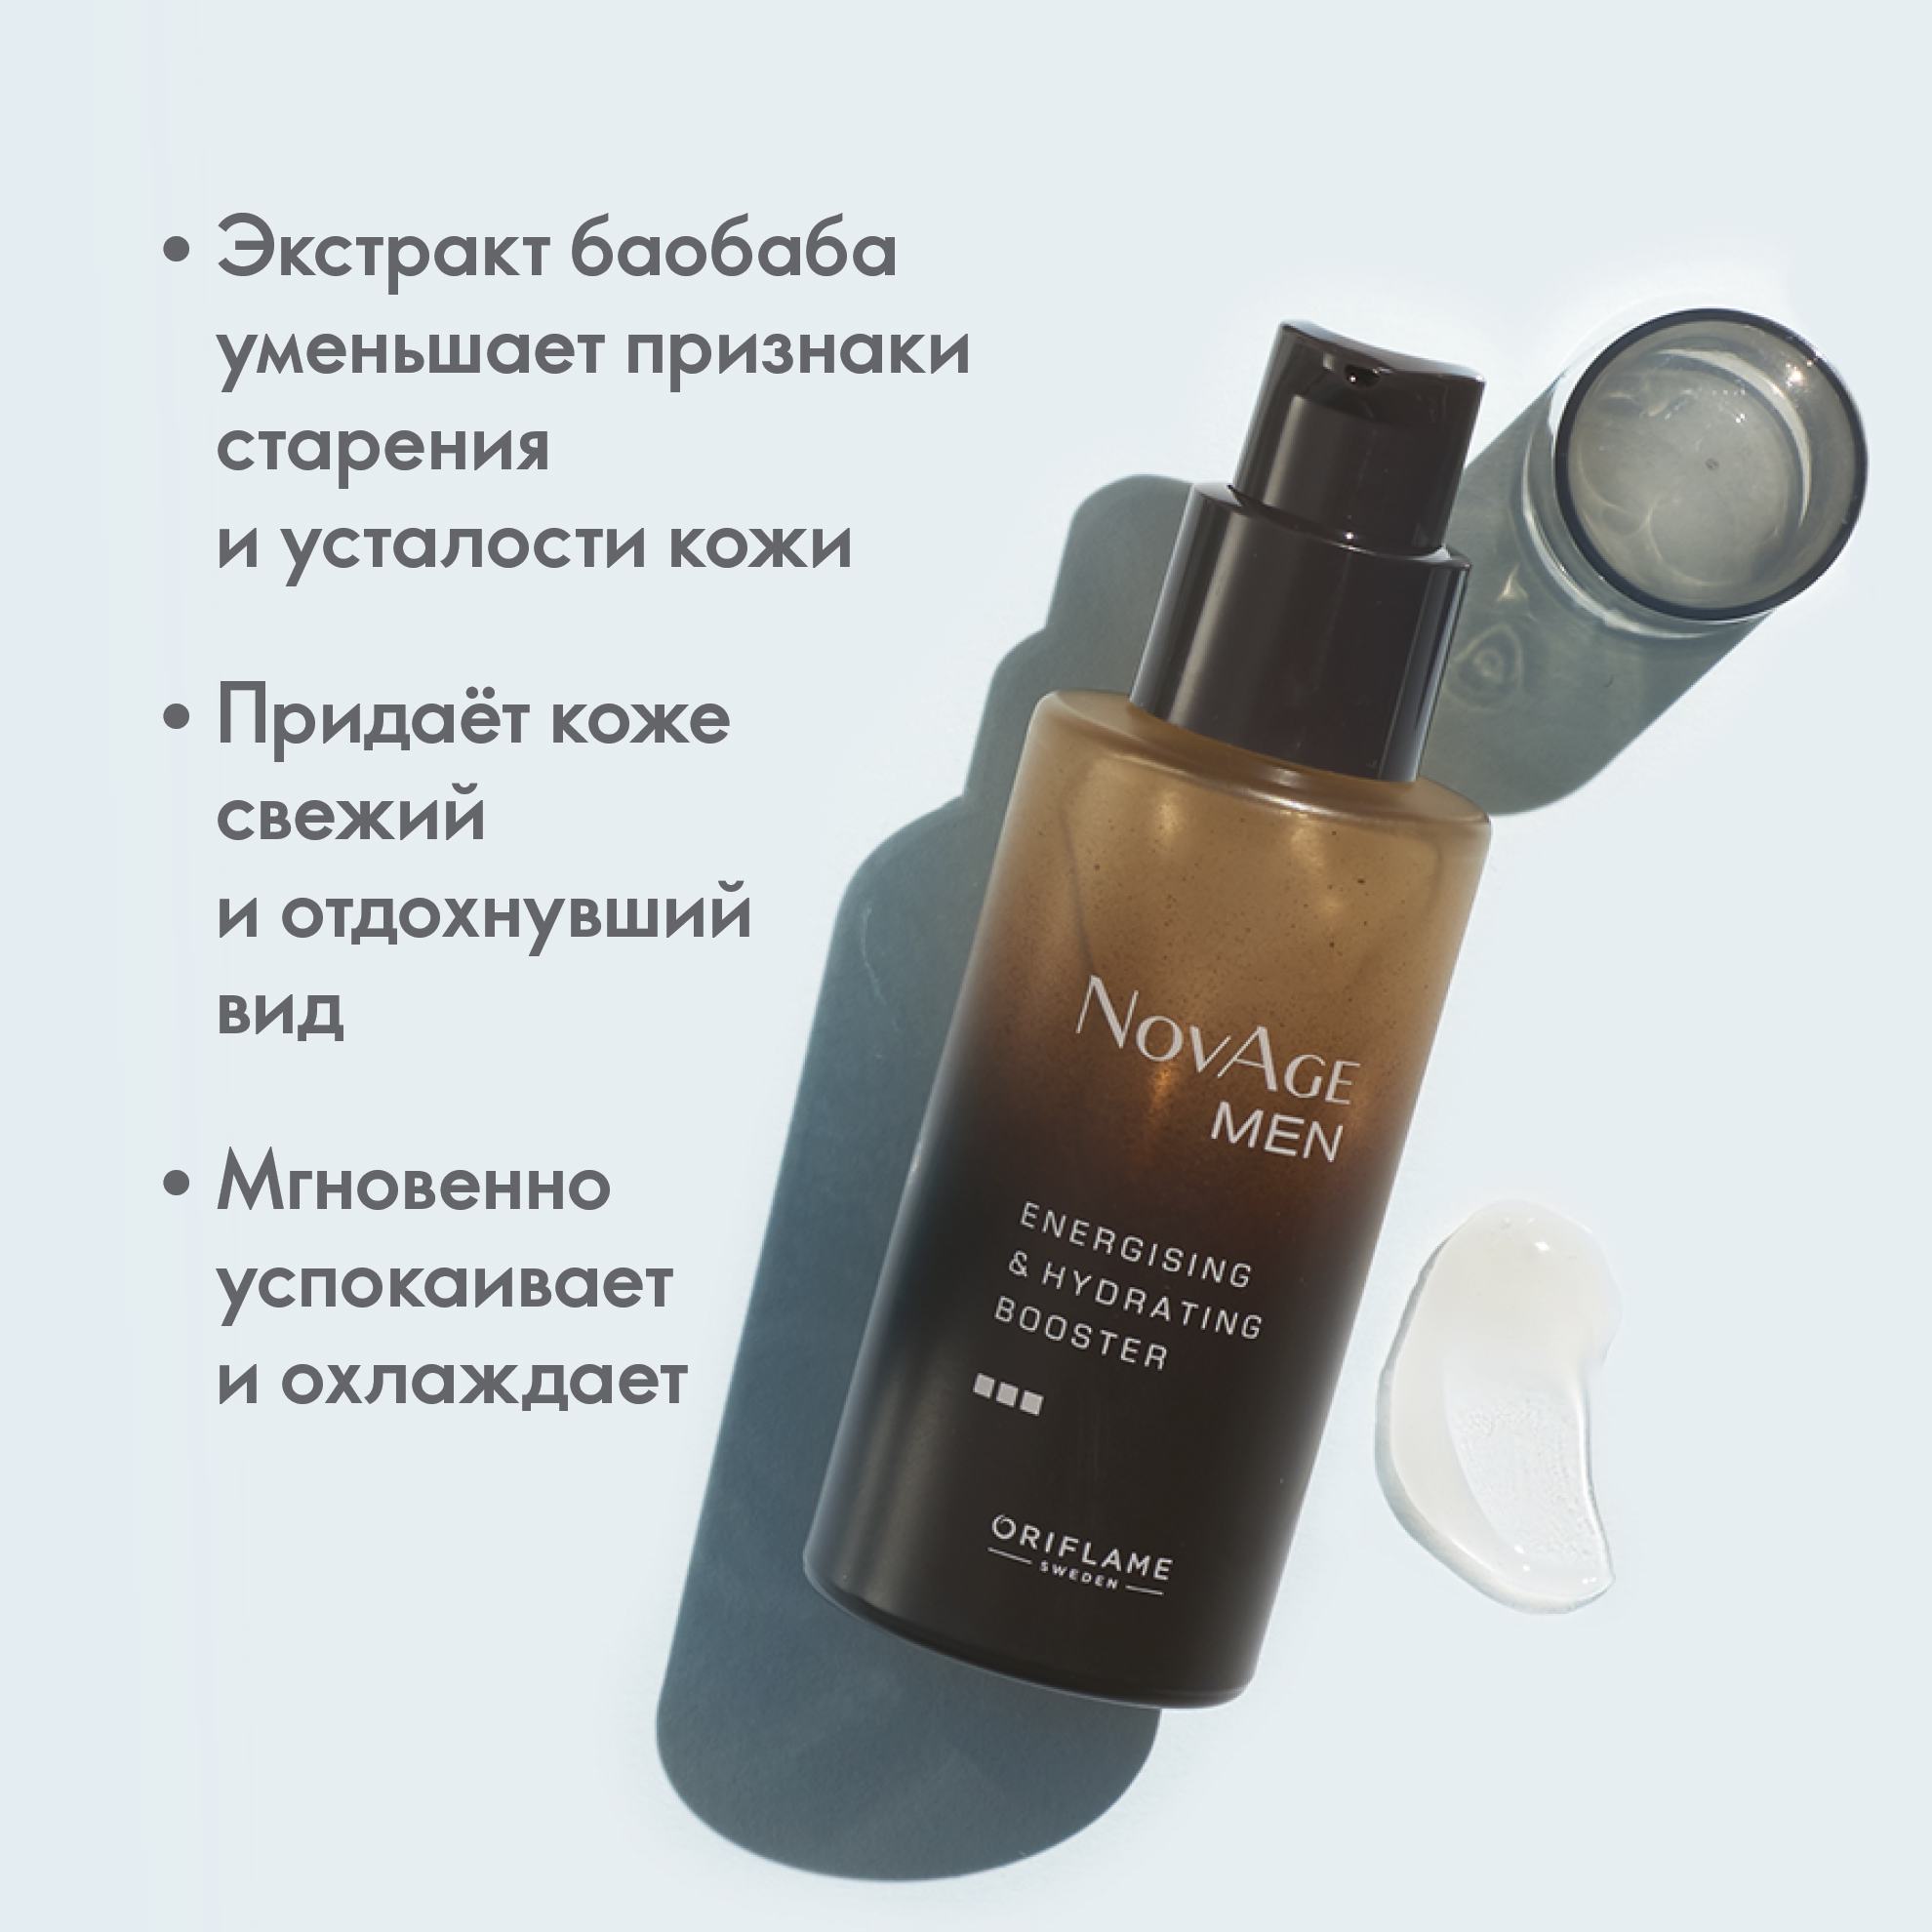 https://media-cdn.oriflame.com/productImage?externalMediaId=product-management-media%2fProducts%2f33200%2fRU%2f33200_3.png&id=14484737&version=1